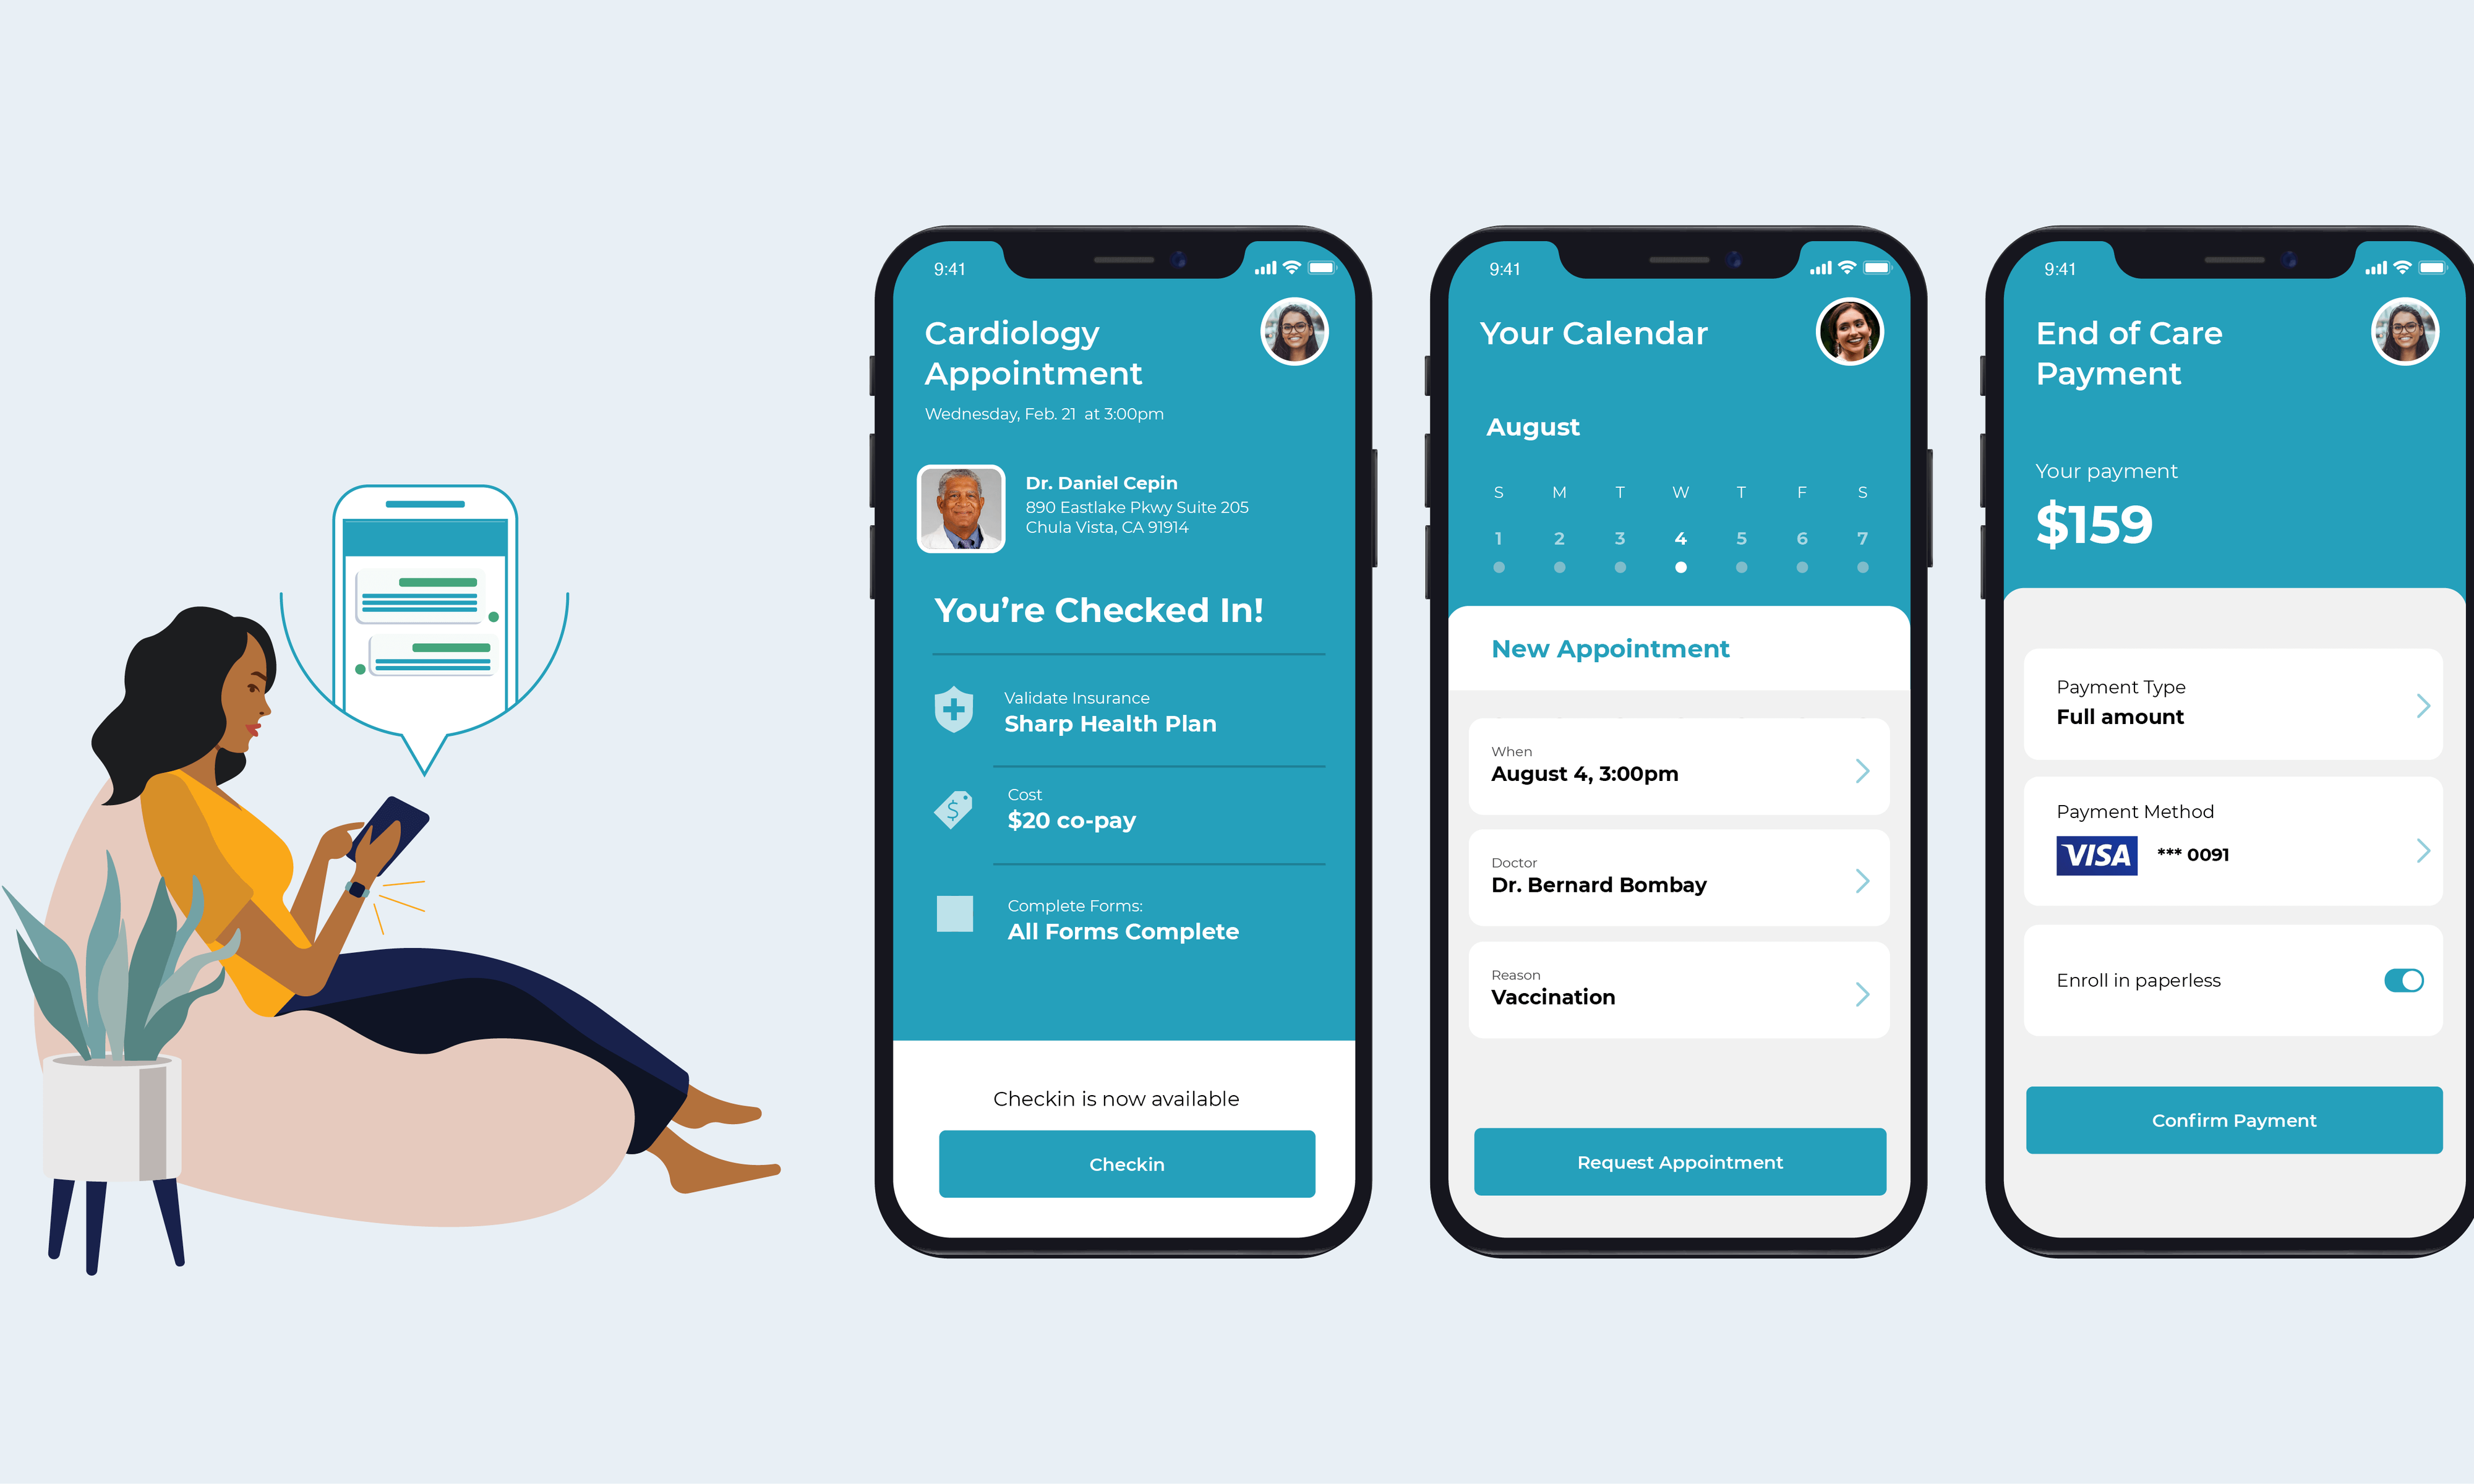 Illustration of a person sitting and using a mobile healthcare app, with three mockups of the app to the right